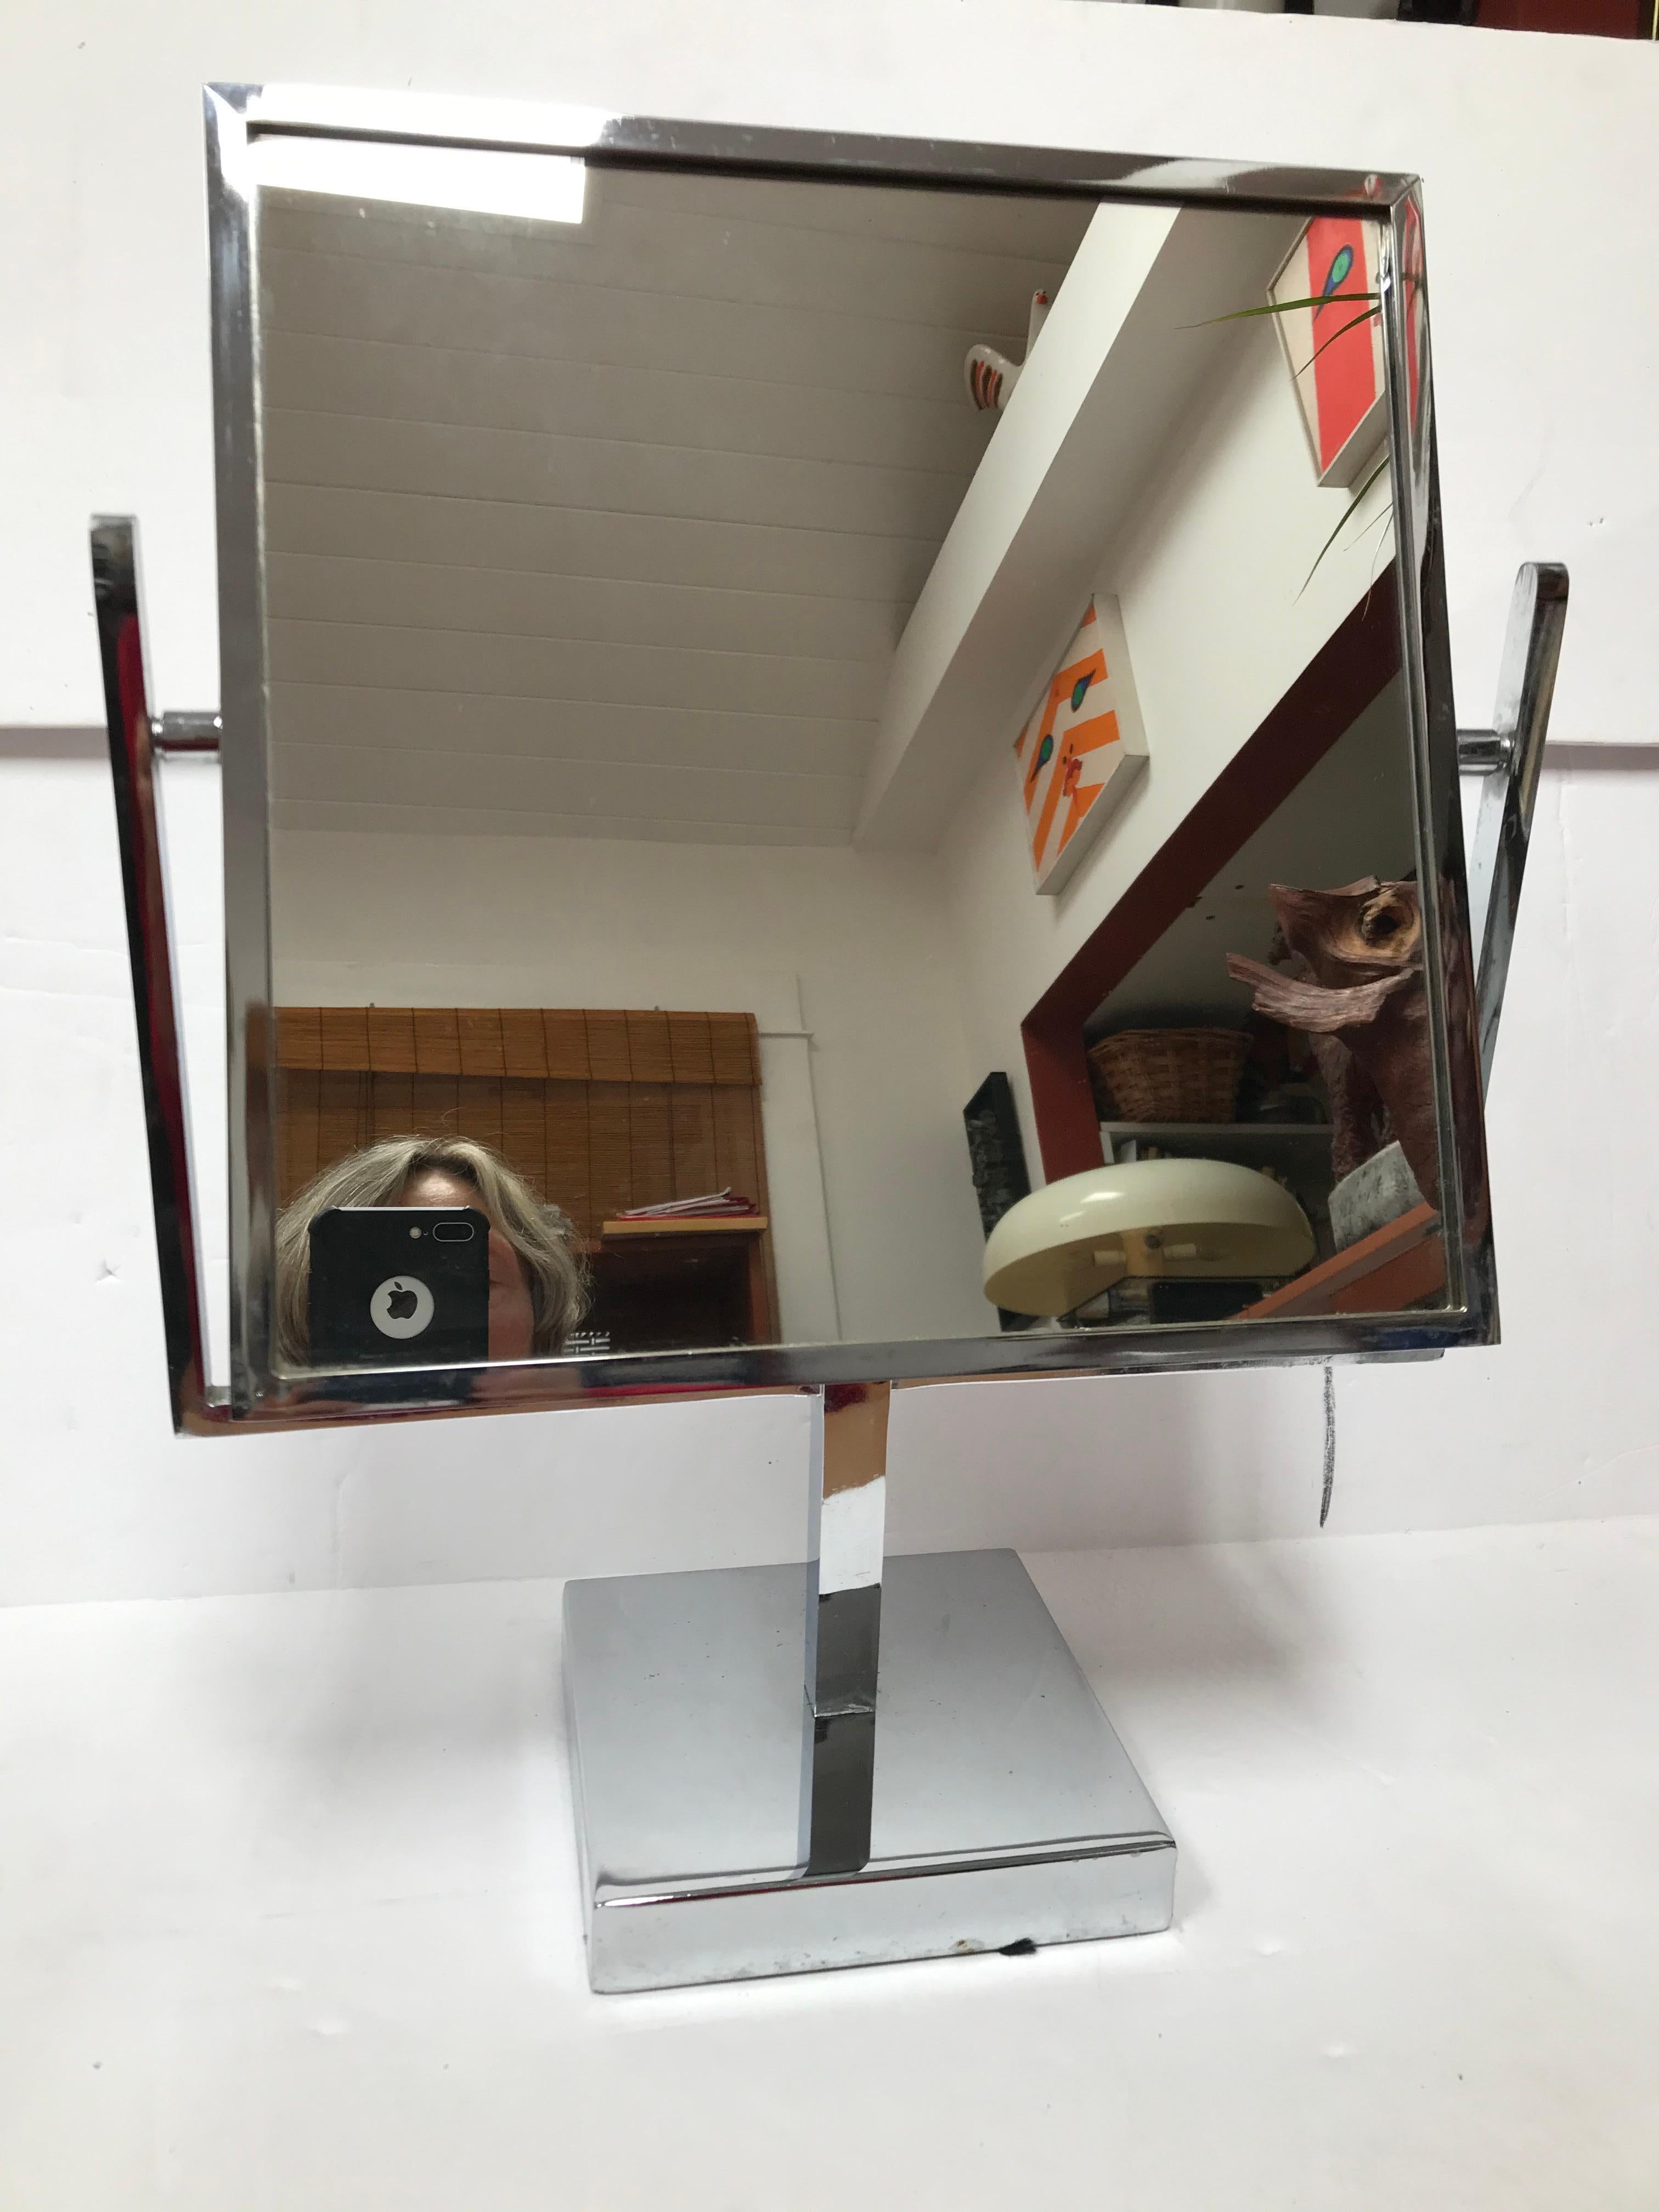 This Double Sided Chrome Vanity Mirror is attributed to Charles Hollis Jones. It has a chrome base and a double sided mirror, typical of the 1970s.

Charles Hollis Jones is an American artist and furniture designer who is recognized by the